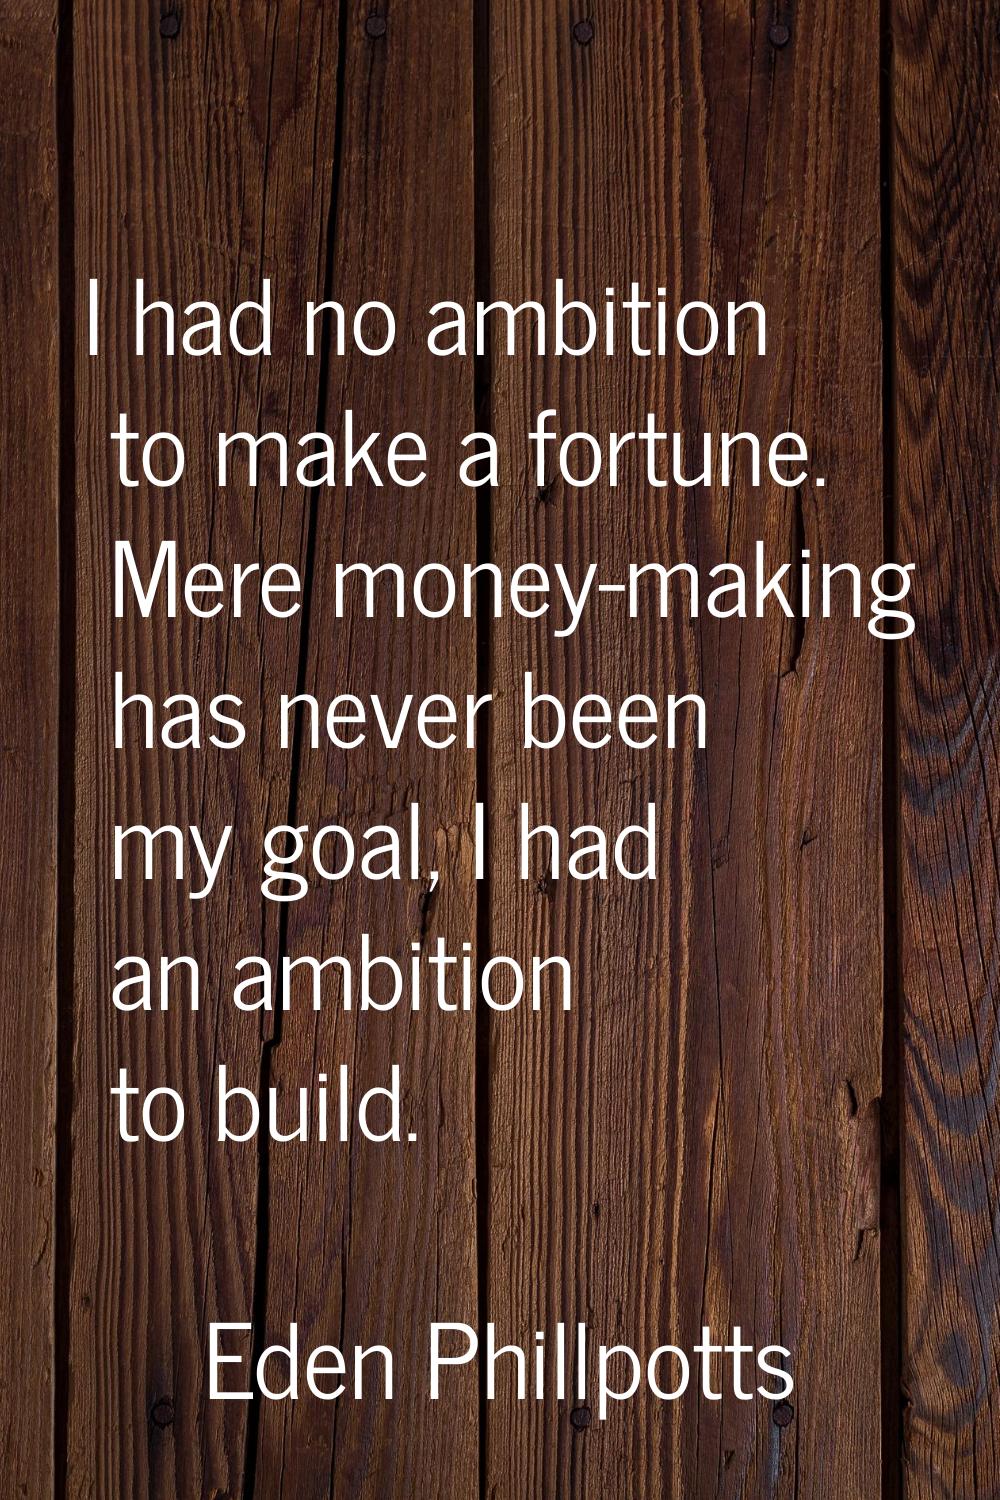 I had no ambition to make a fortune. Mere money-making has never been my goal, I had an ambition to